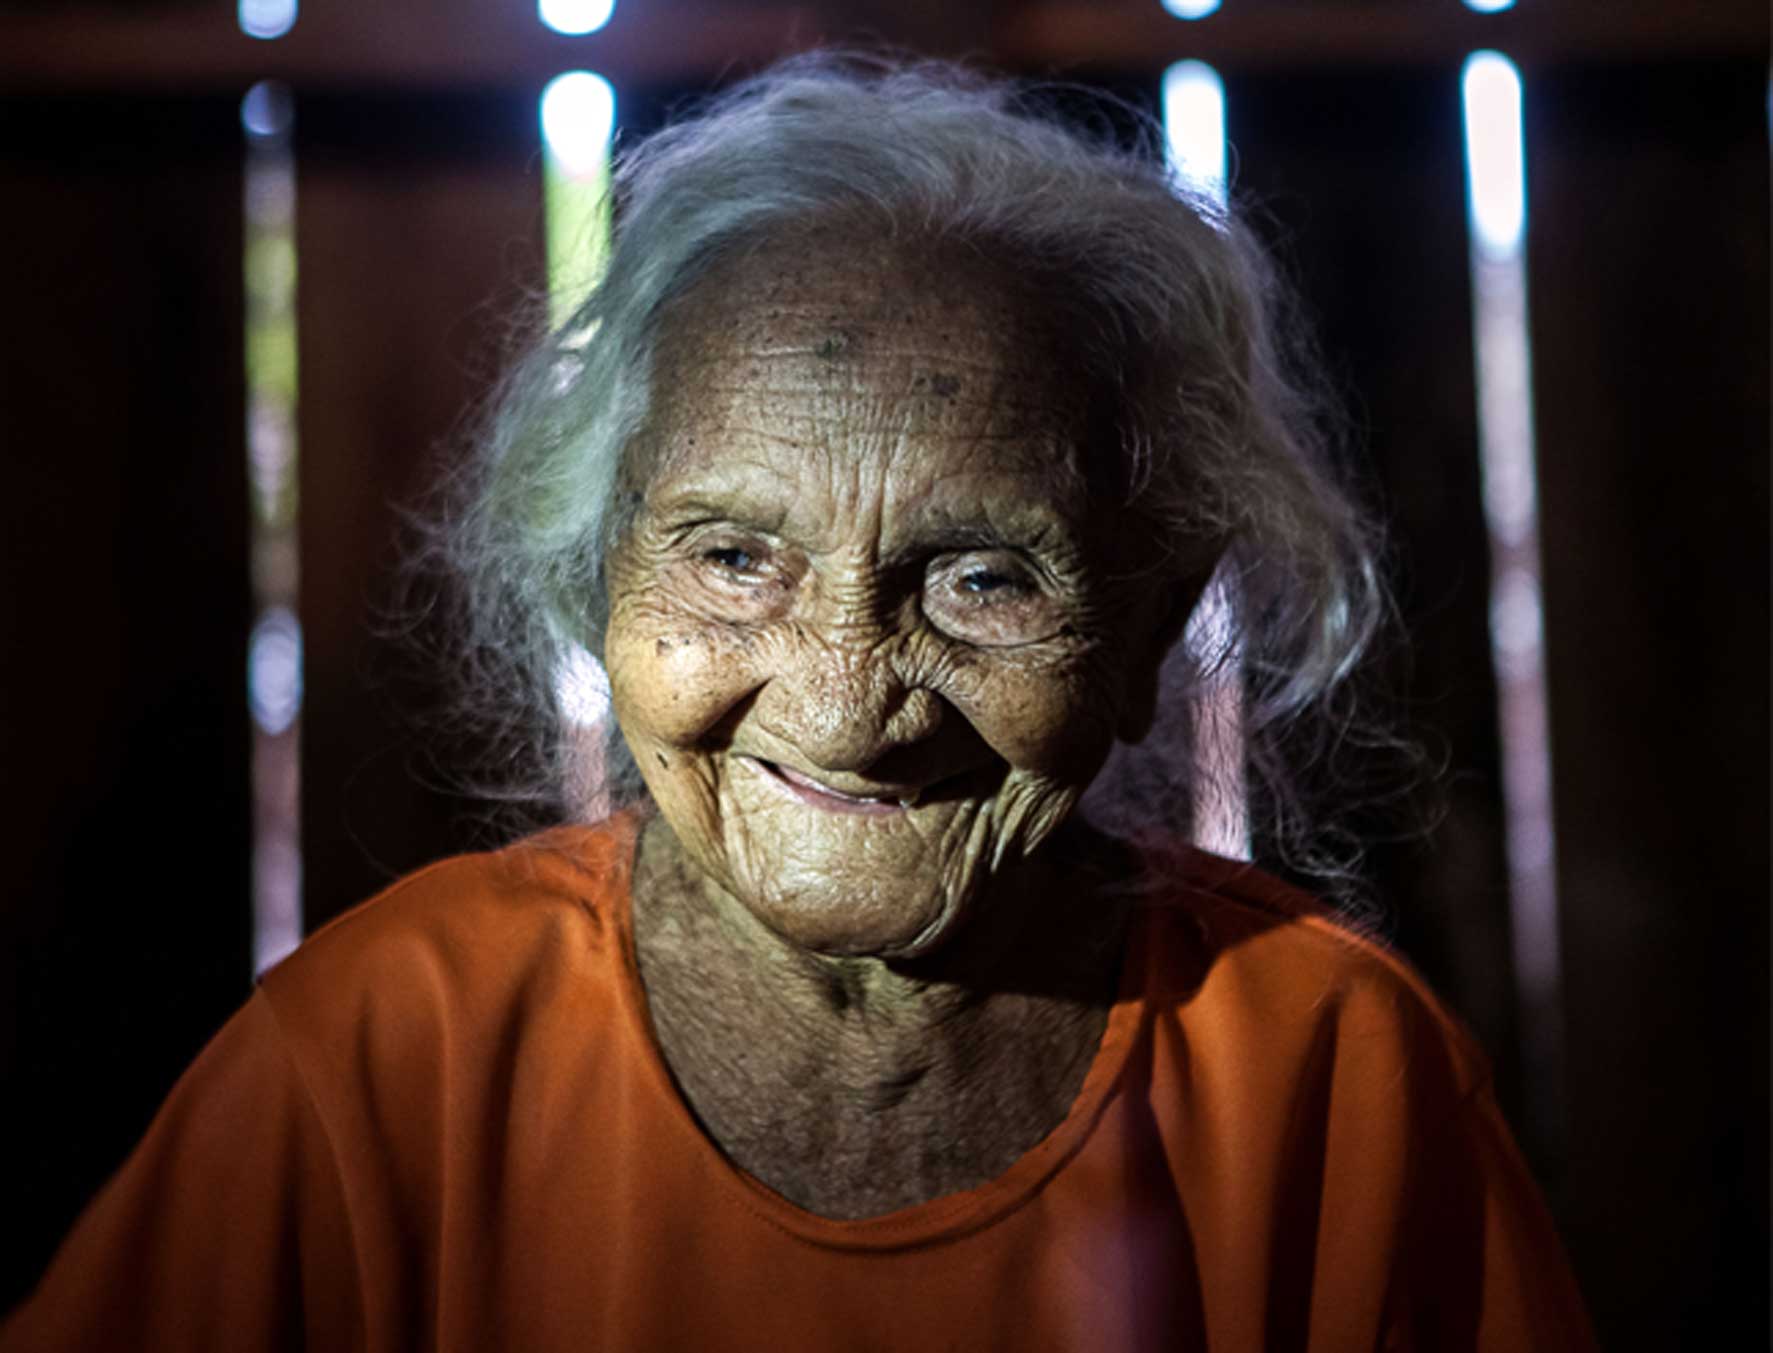 107-year-old Dona Bibiana is the oldest inhabitant of Pimental which will be flooded by the new dam. She gets too upset and can’t discuss the flooding and destruction of her community, so prefers hunting stories from the past or tales of pink dolphins that became people. Photo by Lilo Clareto/Repórter Brasil